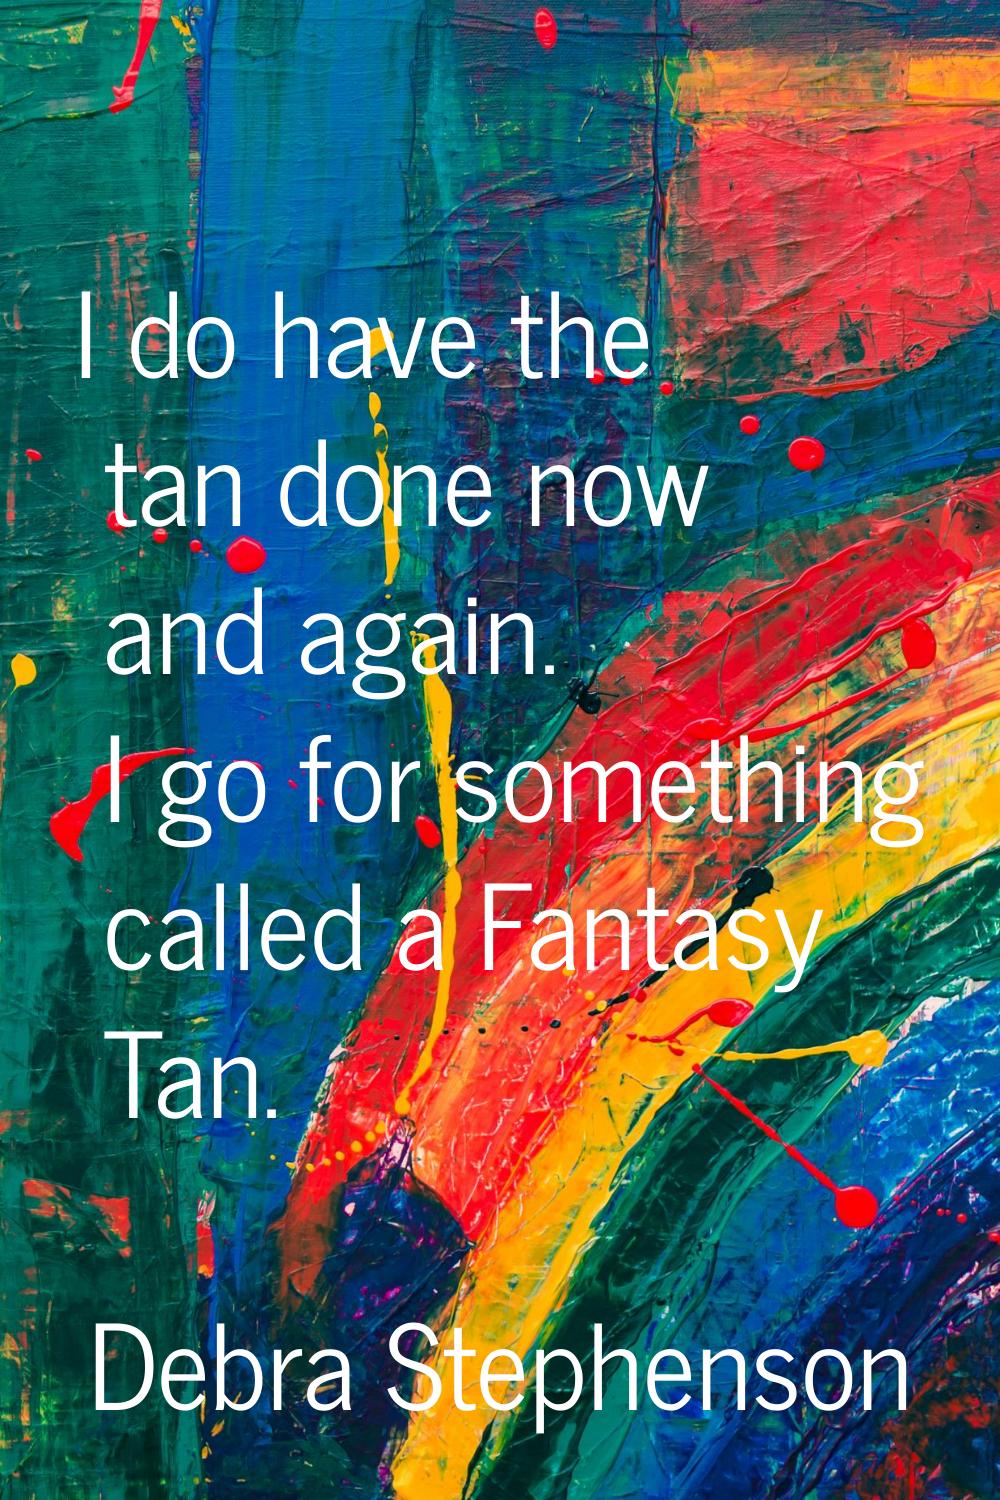 I do have the tan done now and again. I go for something called a Fantasy Tan.